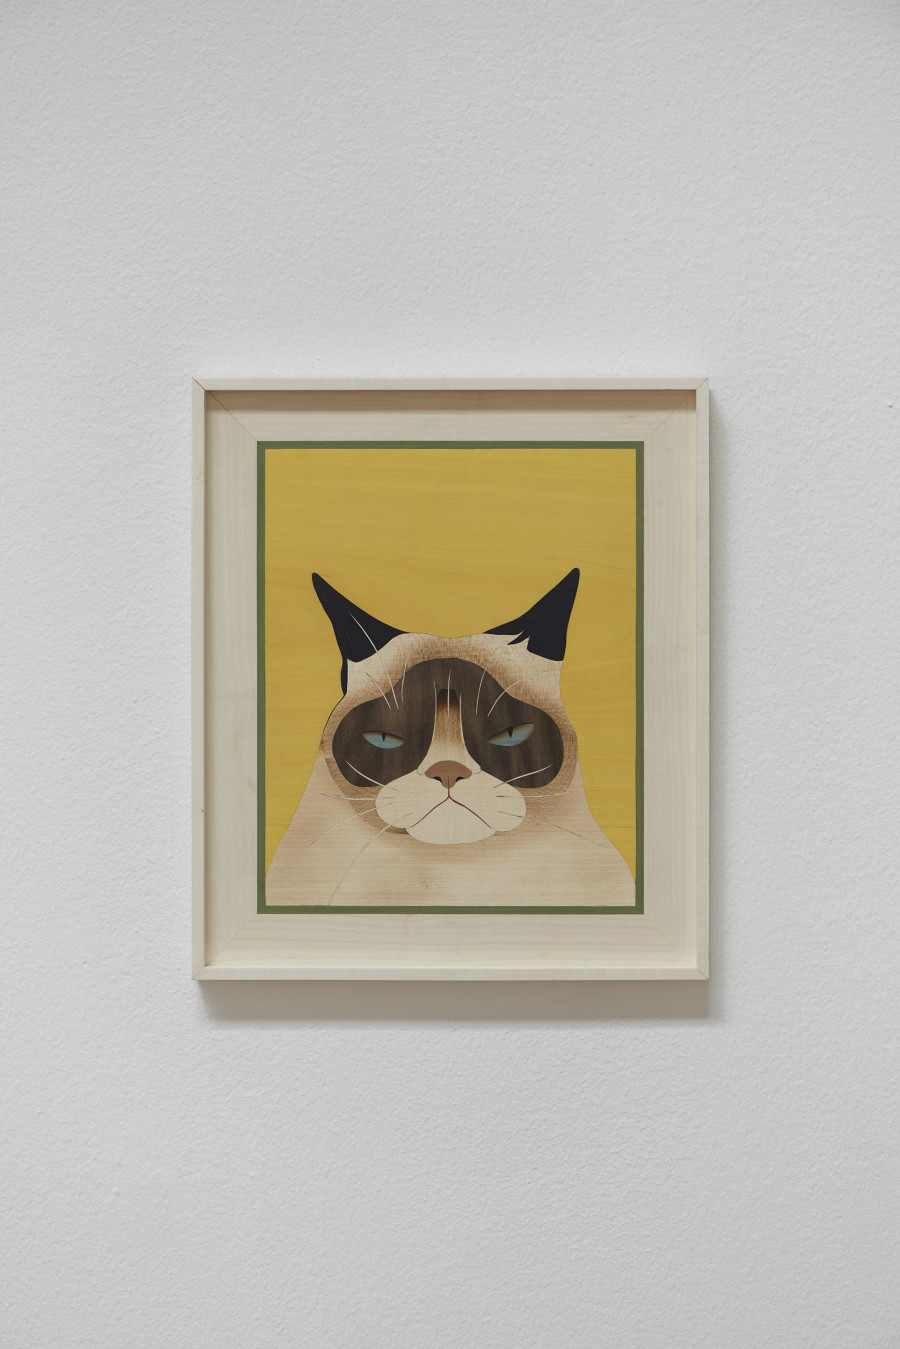 Camille Blatrix, installation view, Standby Mice Station, Kunsthalle Basel, 2020, view on Grumpy Cat (Summer), 2020. Photo: Philipp Hänger / Kunsthalle Basel. Courtesy of the artist; Galerie Balice Hertling, Paris, and Andrew Kreps Gallery, New York